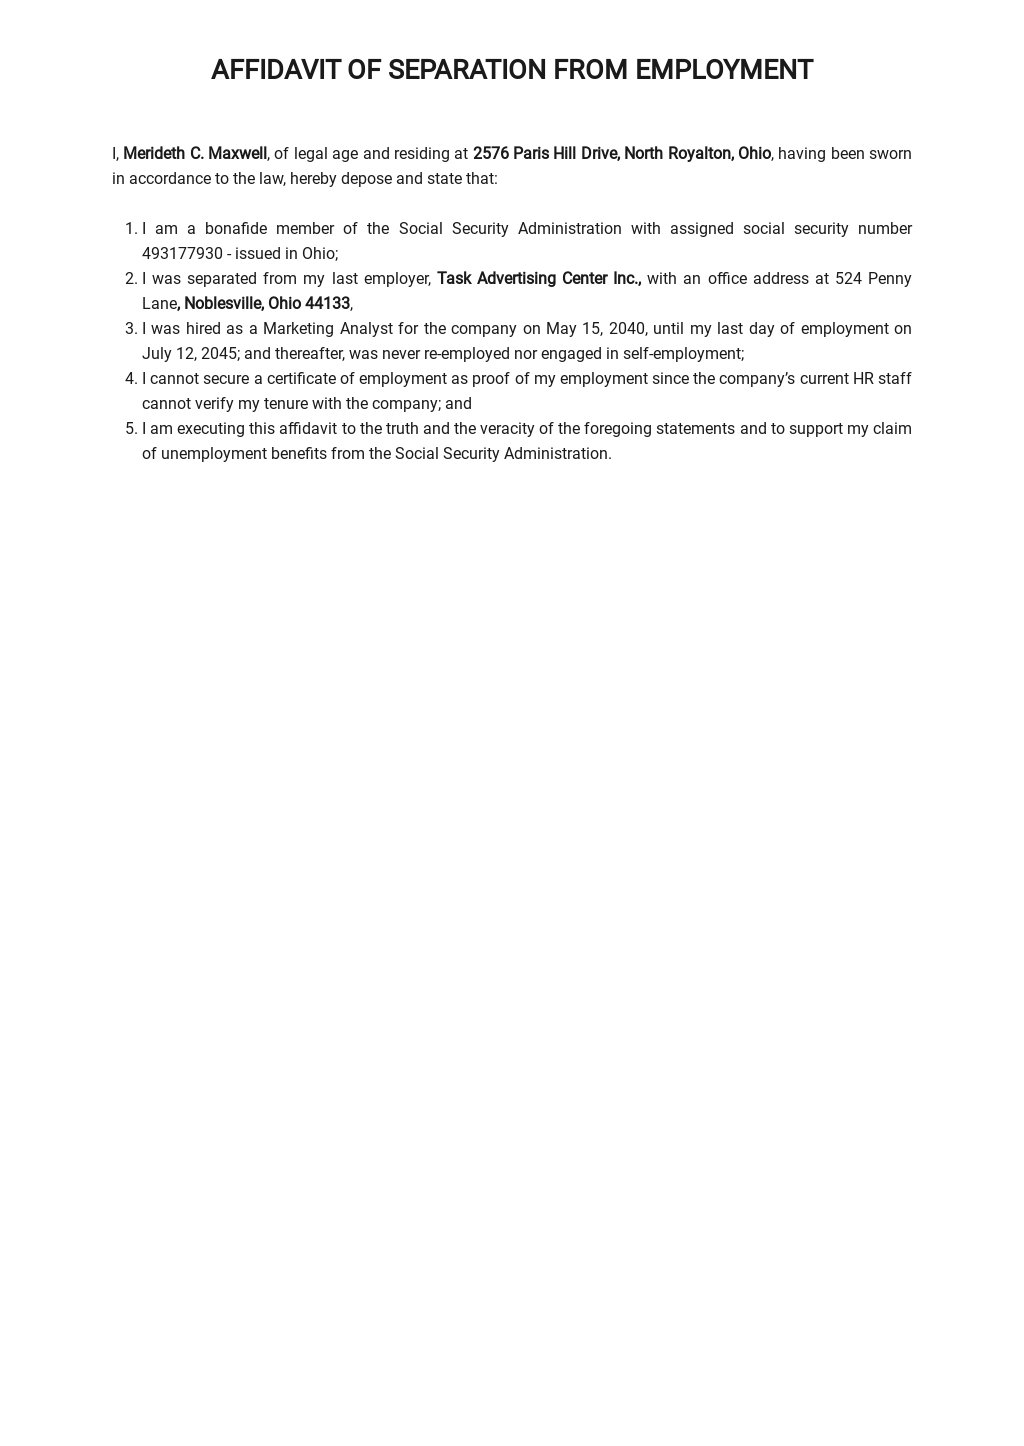 Affidavit of Separation from Employment Template